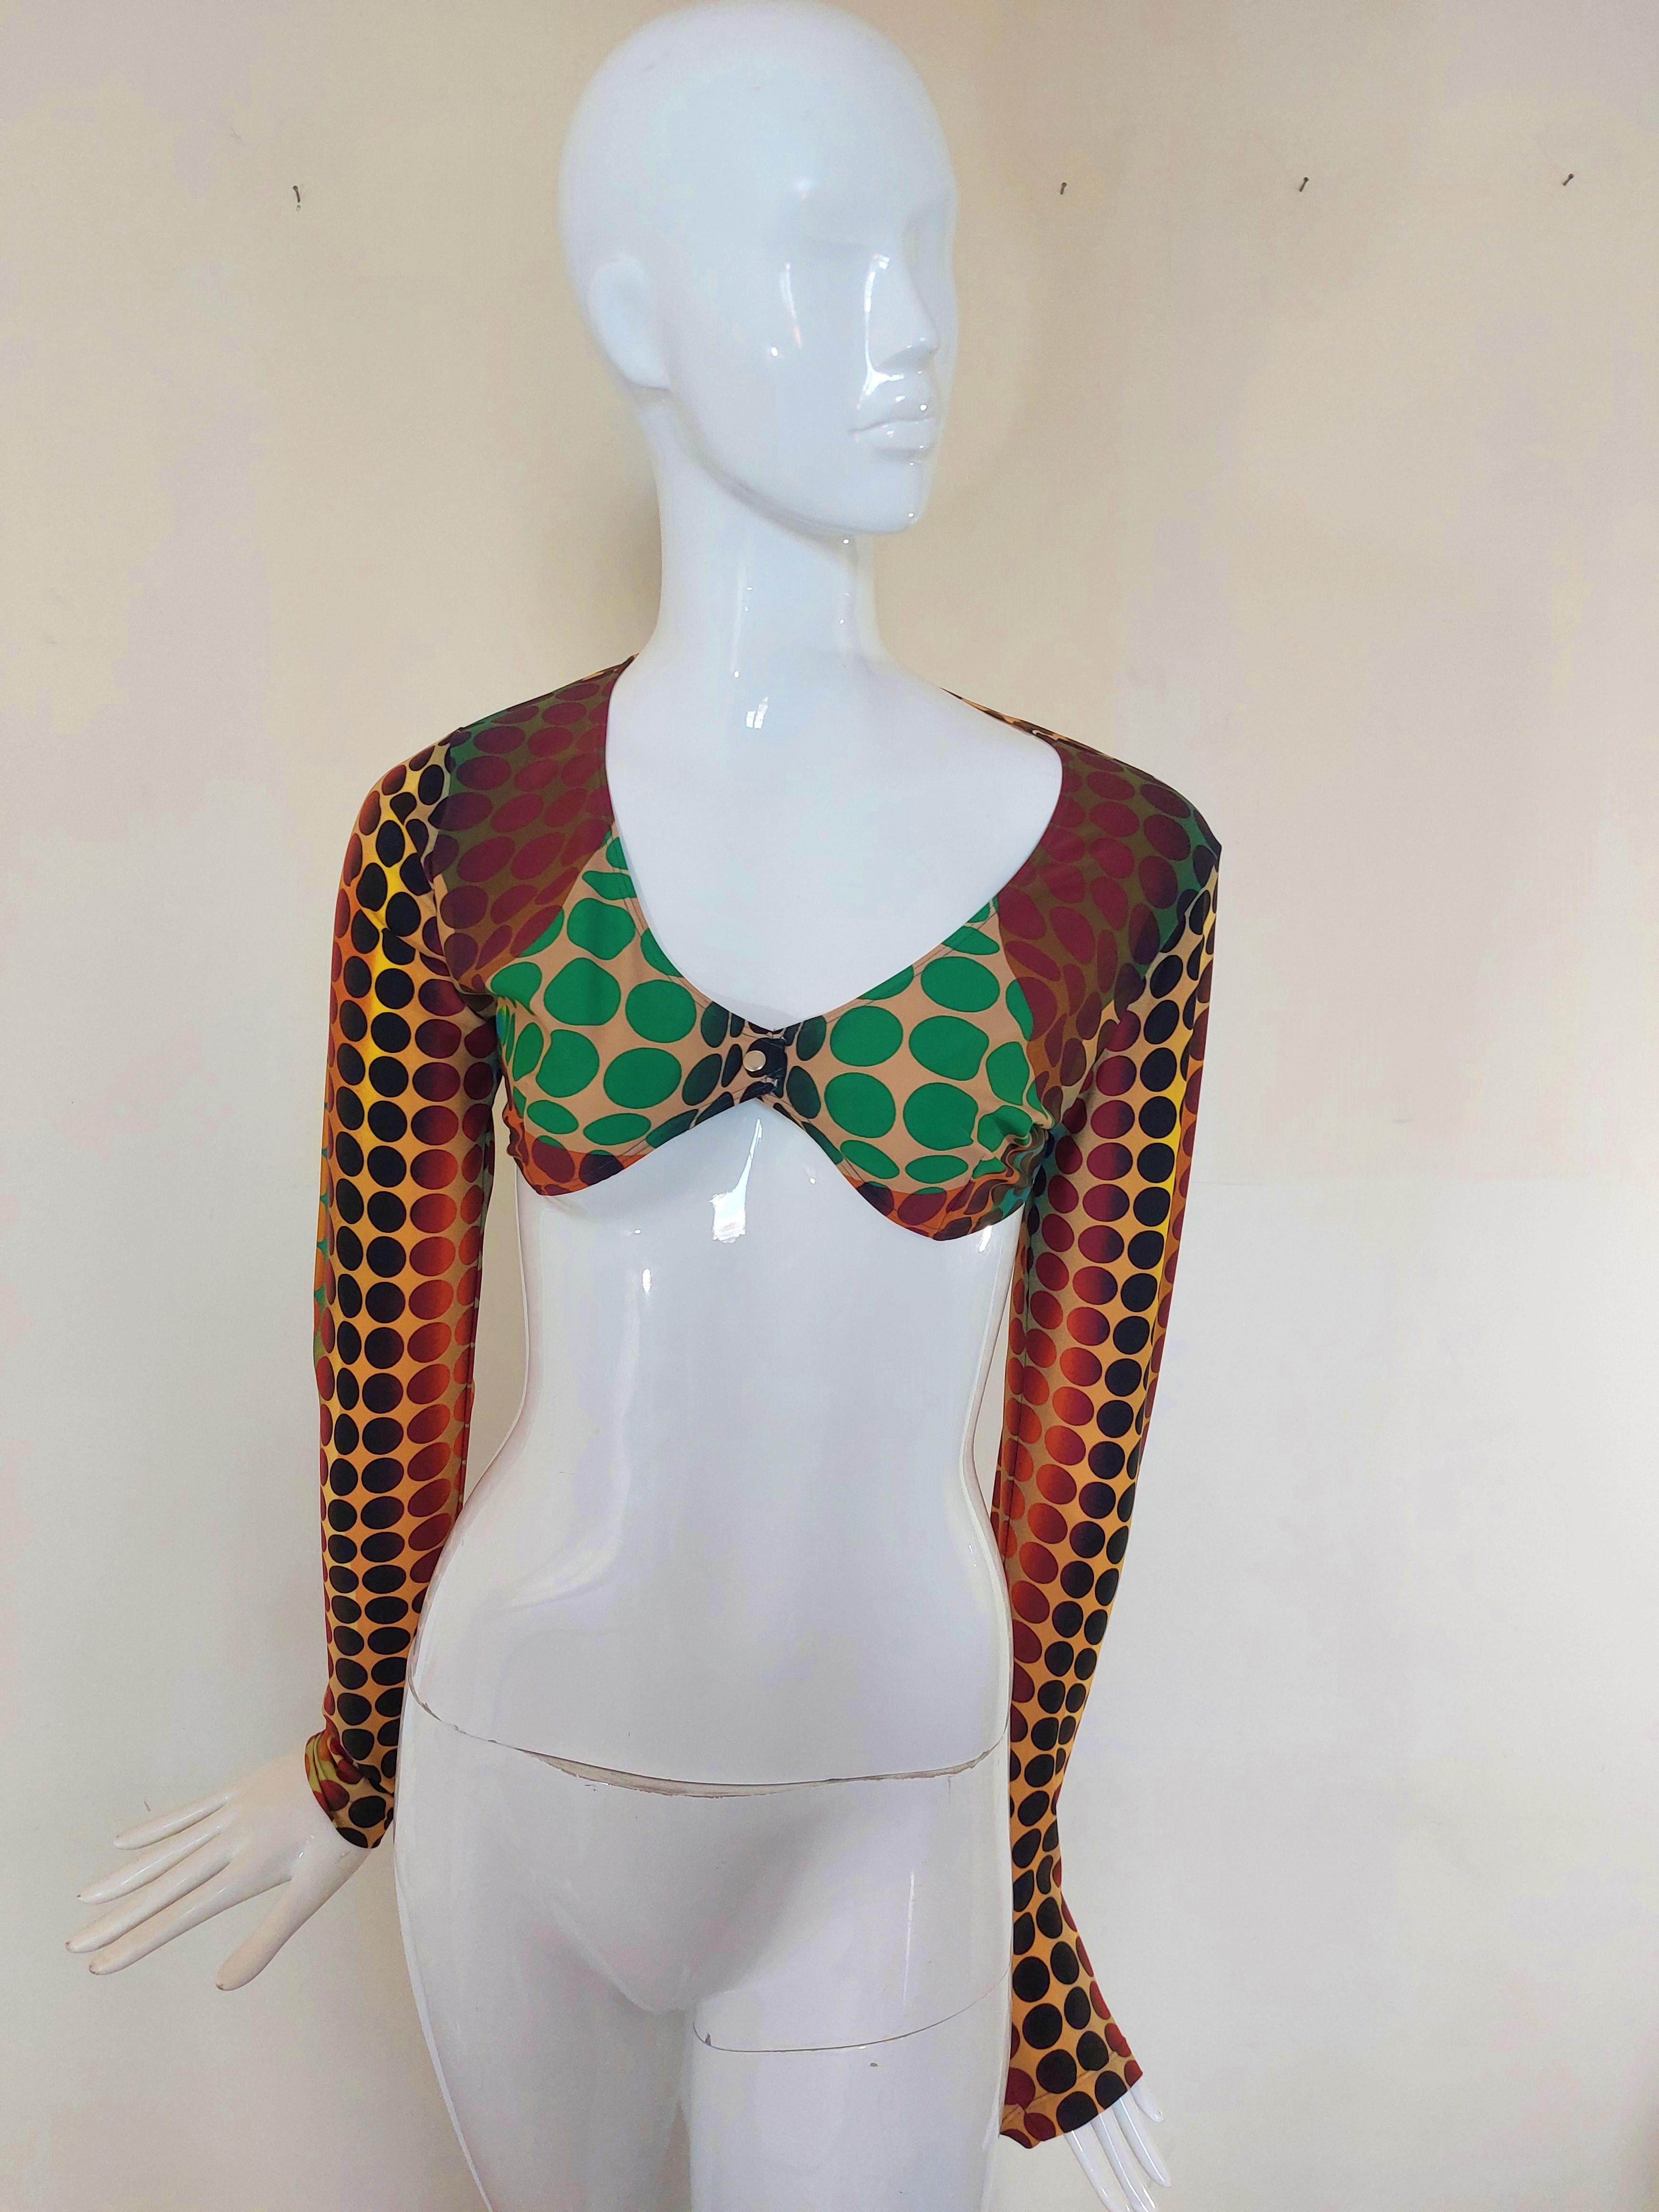  Jean-Paul Gaultier Cyber Psychedelic Dots  Optical Illusion Crop top Bustier  For Sale 5